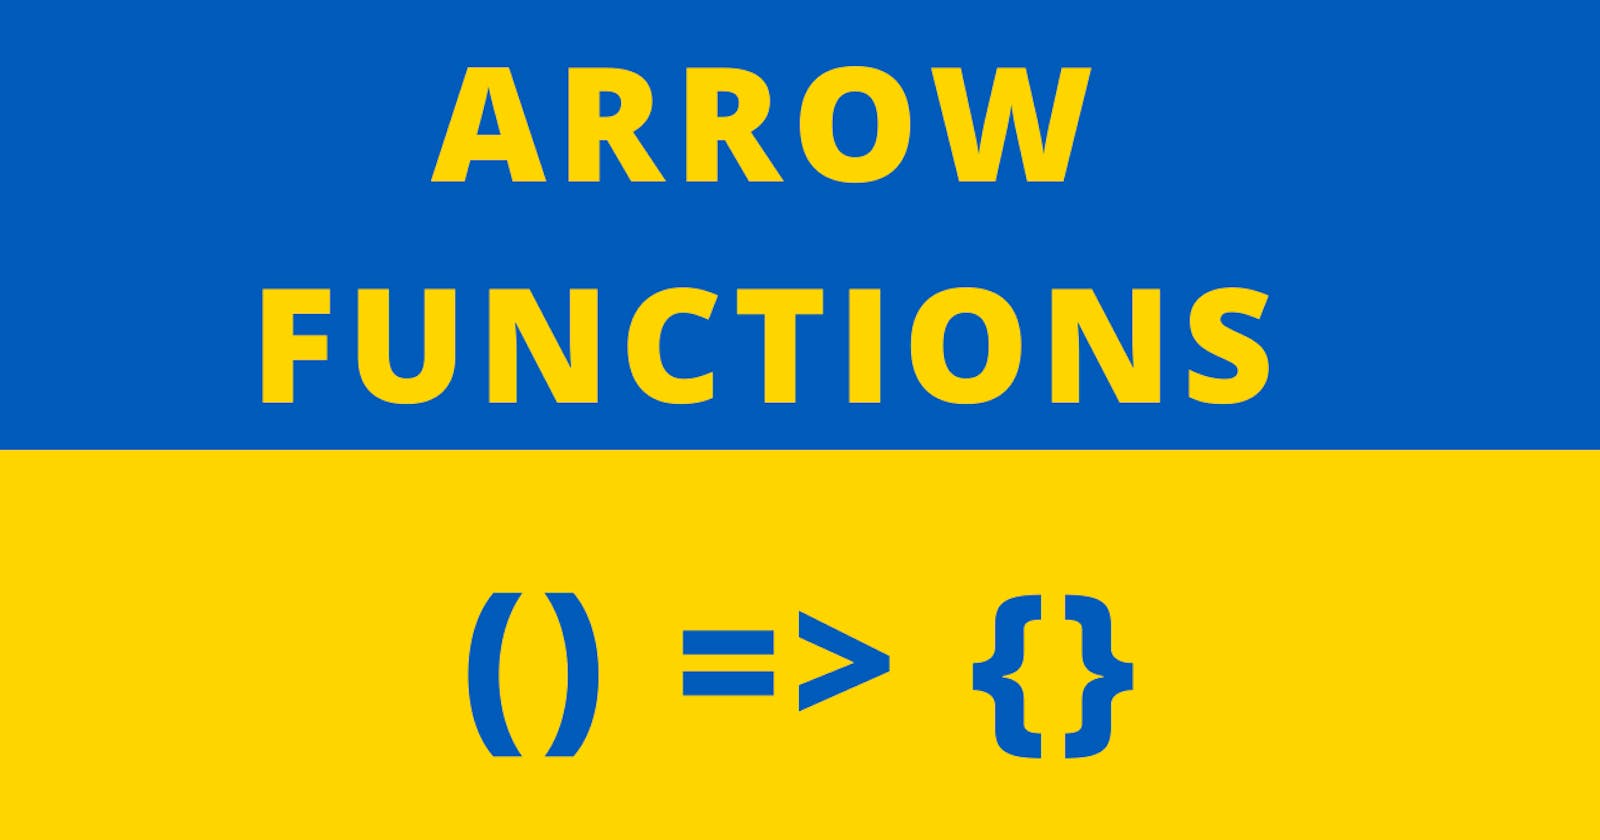 Why do we need arrow functions?